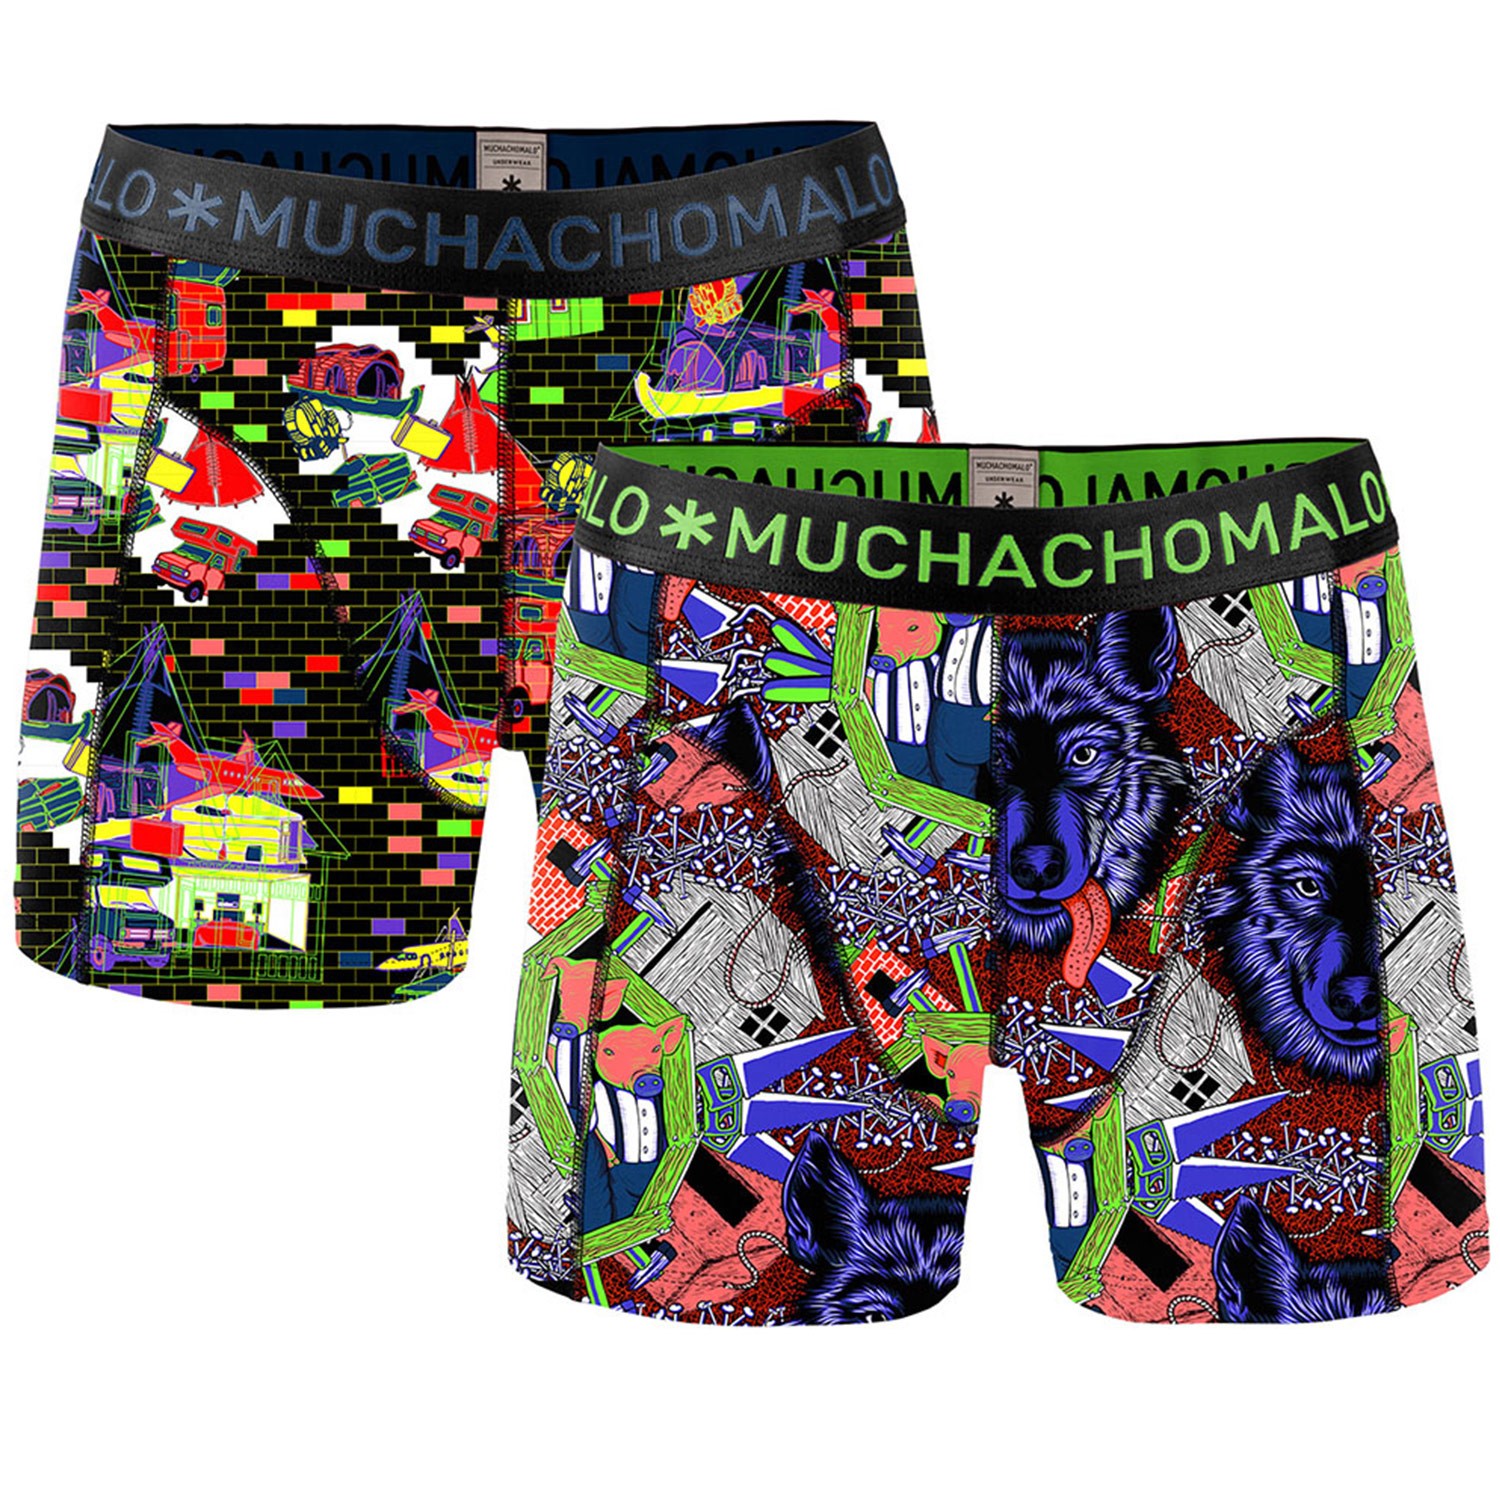 Muchachomalo Build a House Boxer